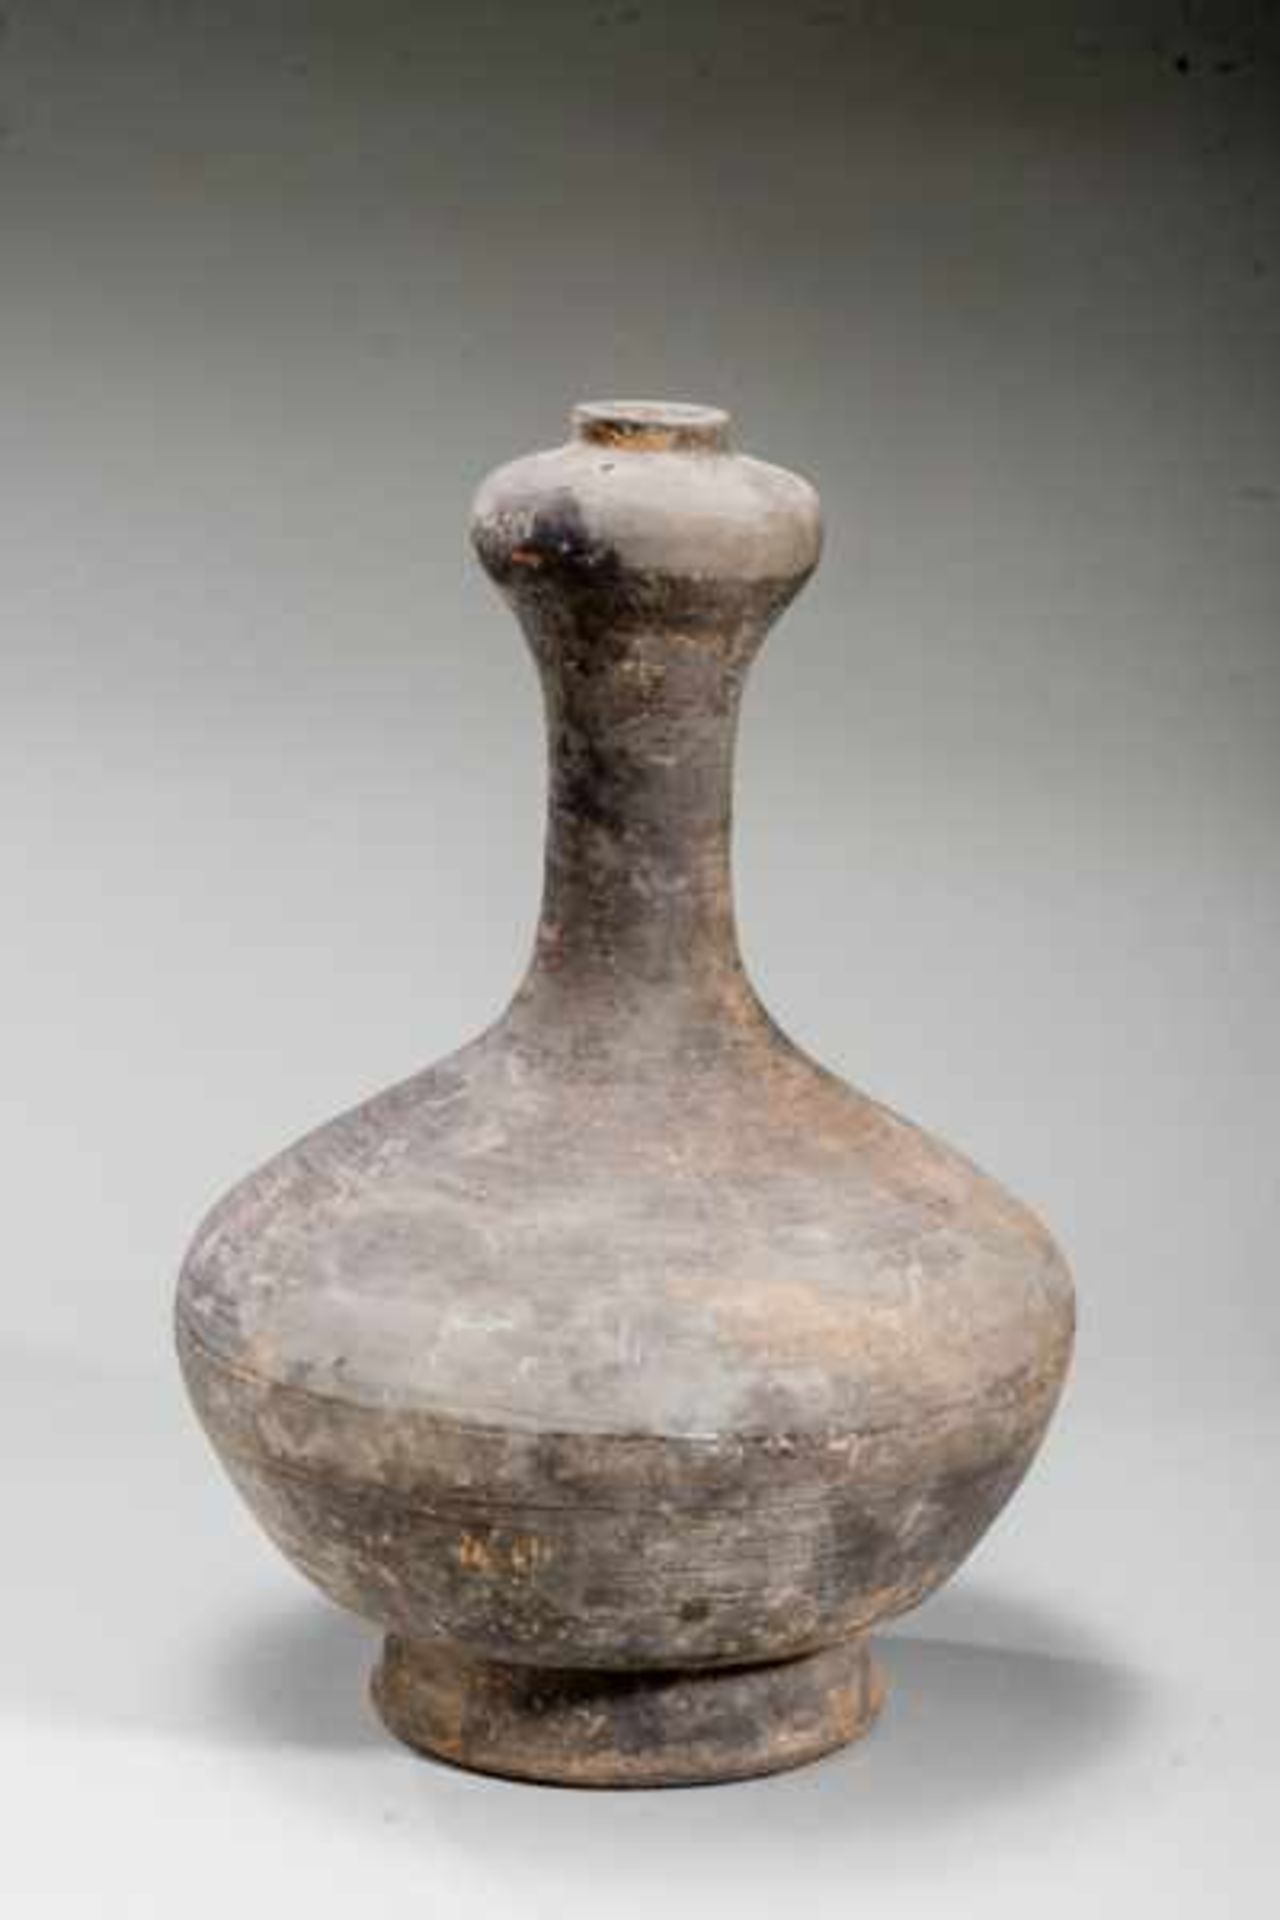 VASE Terracotta with remnants oforiginal painting. China, Handynasty (206 BCE - 220 CE)陶瓶This vase